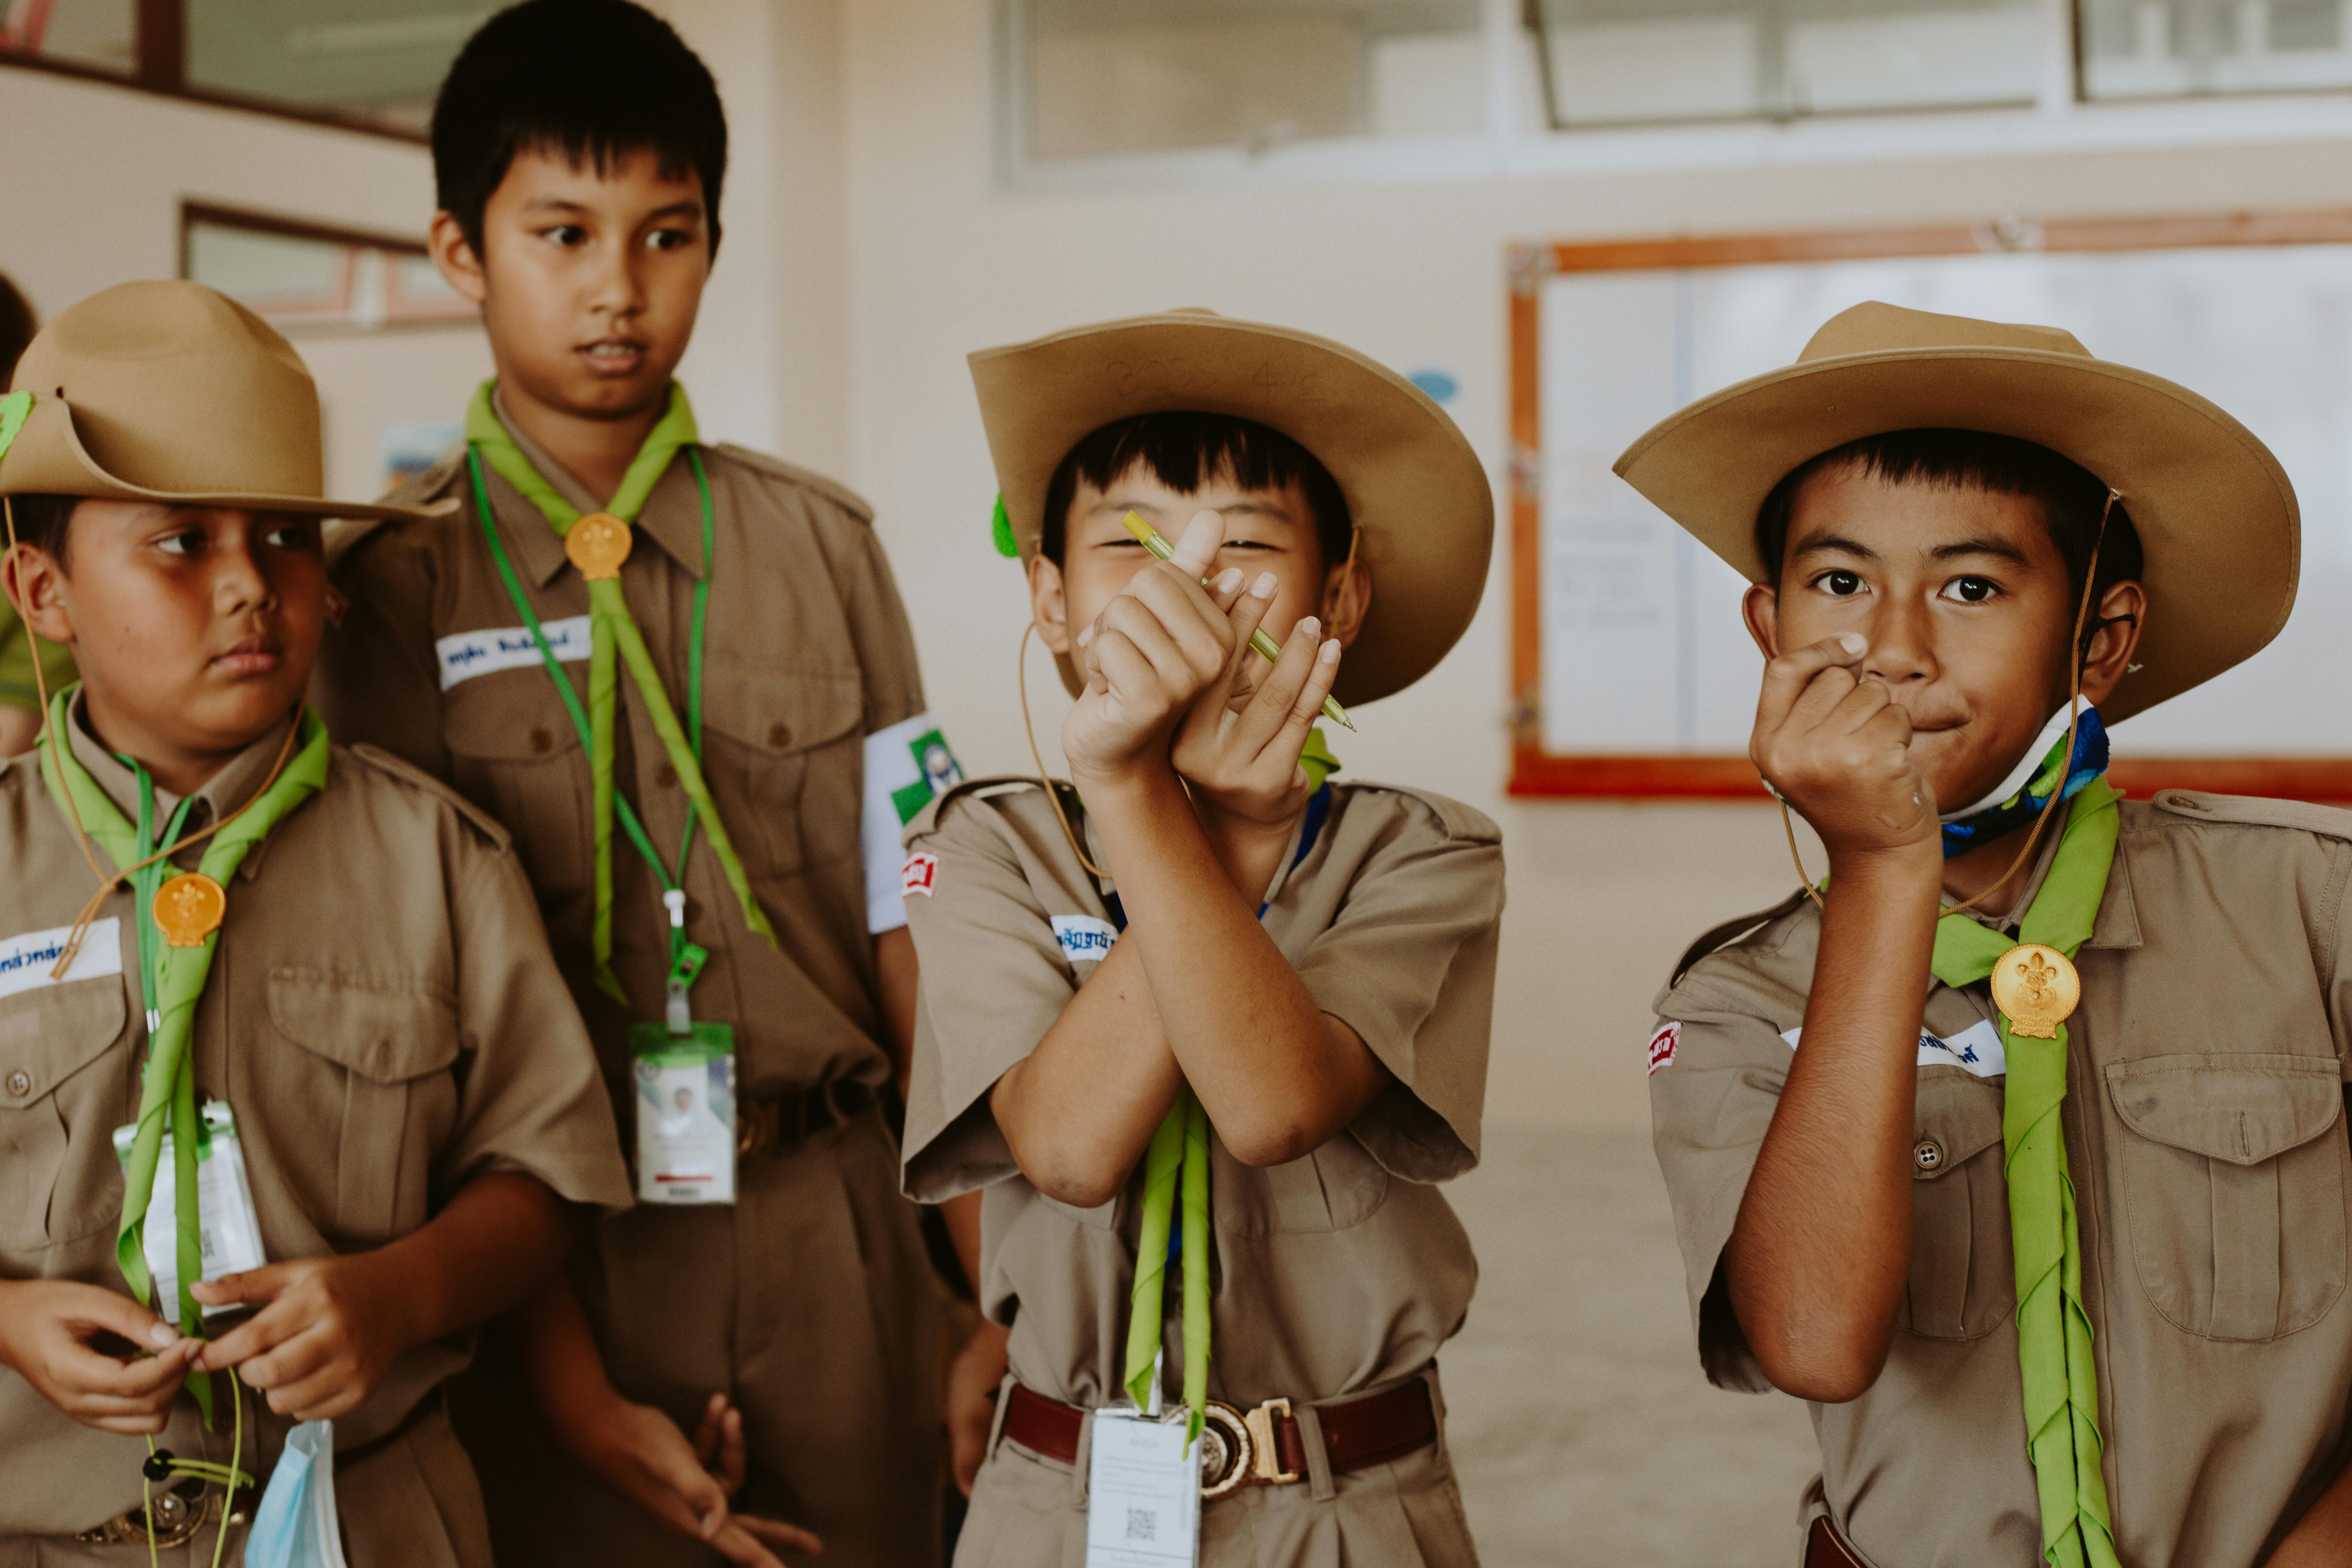 The Philippines boy scout uniforms